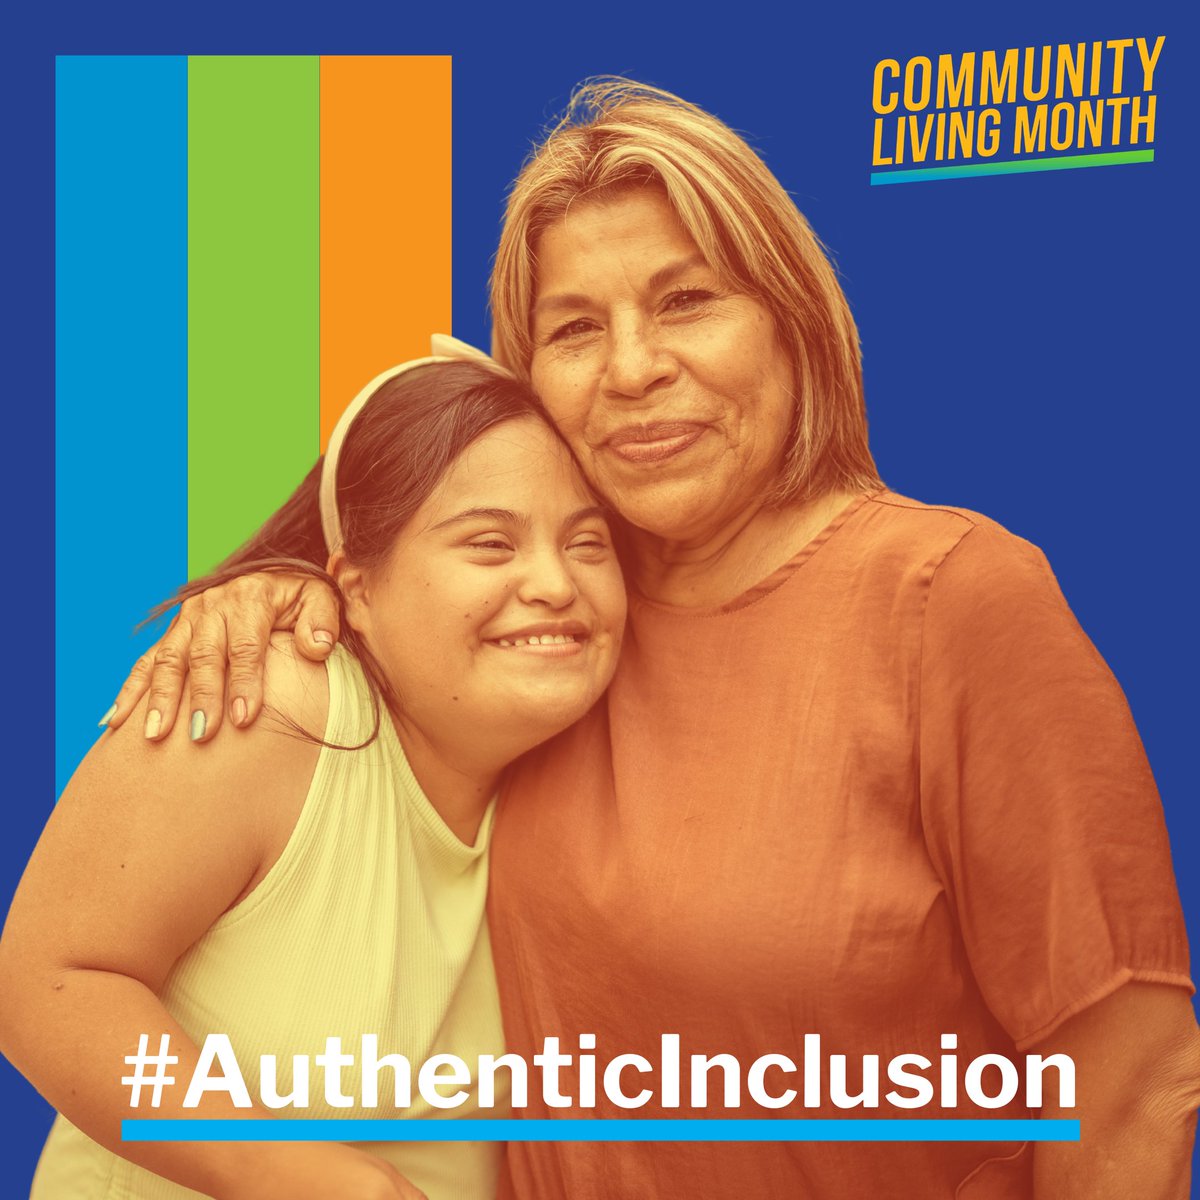 The Community Living movement was initiated by families who insisted on good lives in the community for their loved ones. If you’re a family member, tell us how you or your family advocates for #AuthenticInclusion in your community. #CLMonth2024